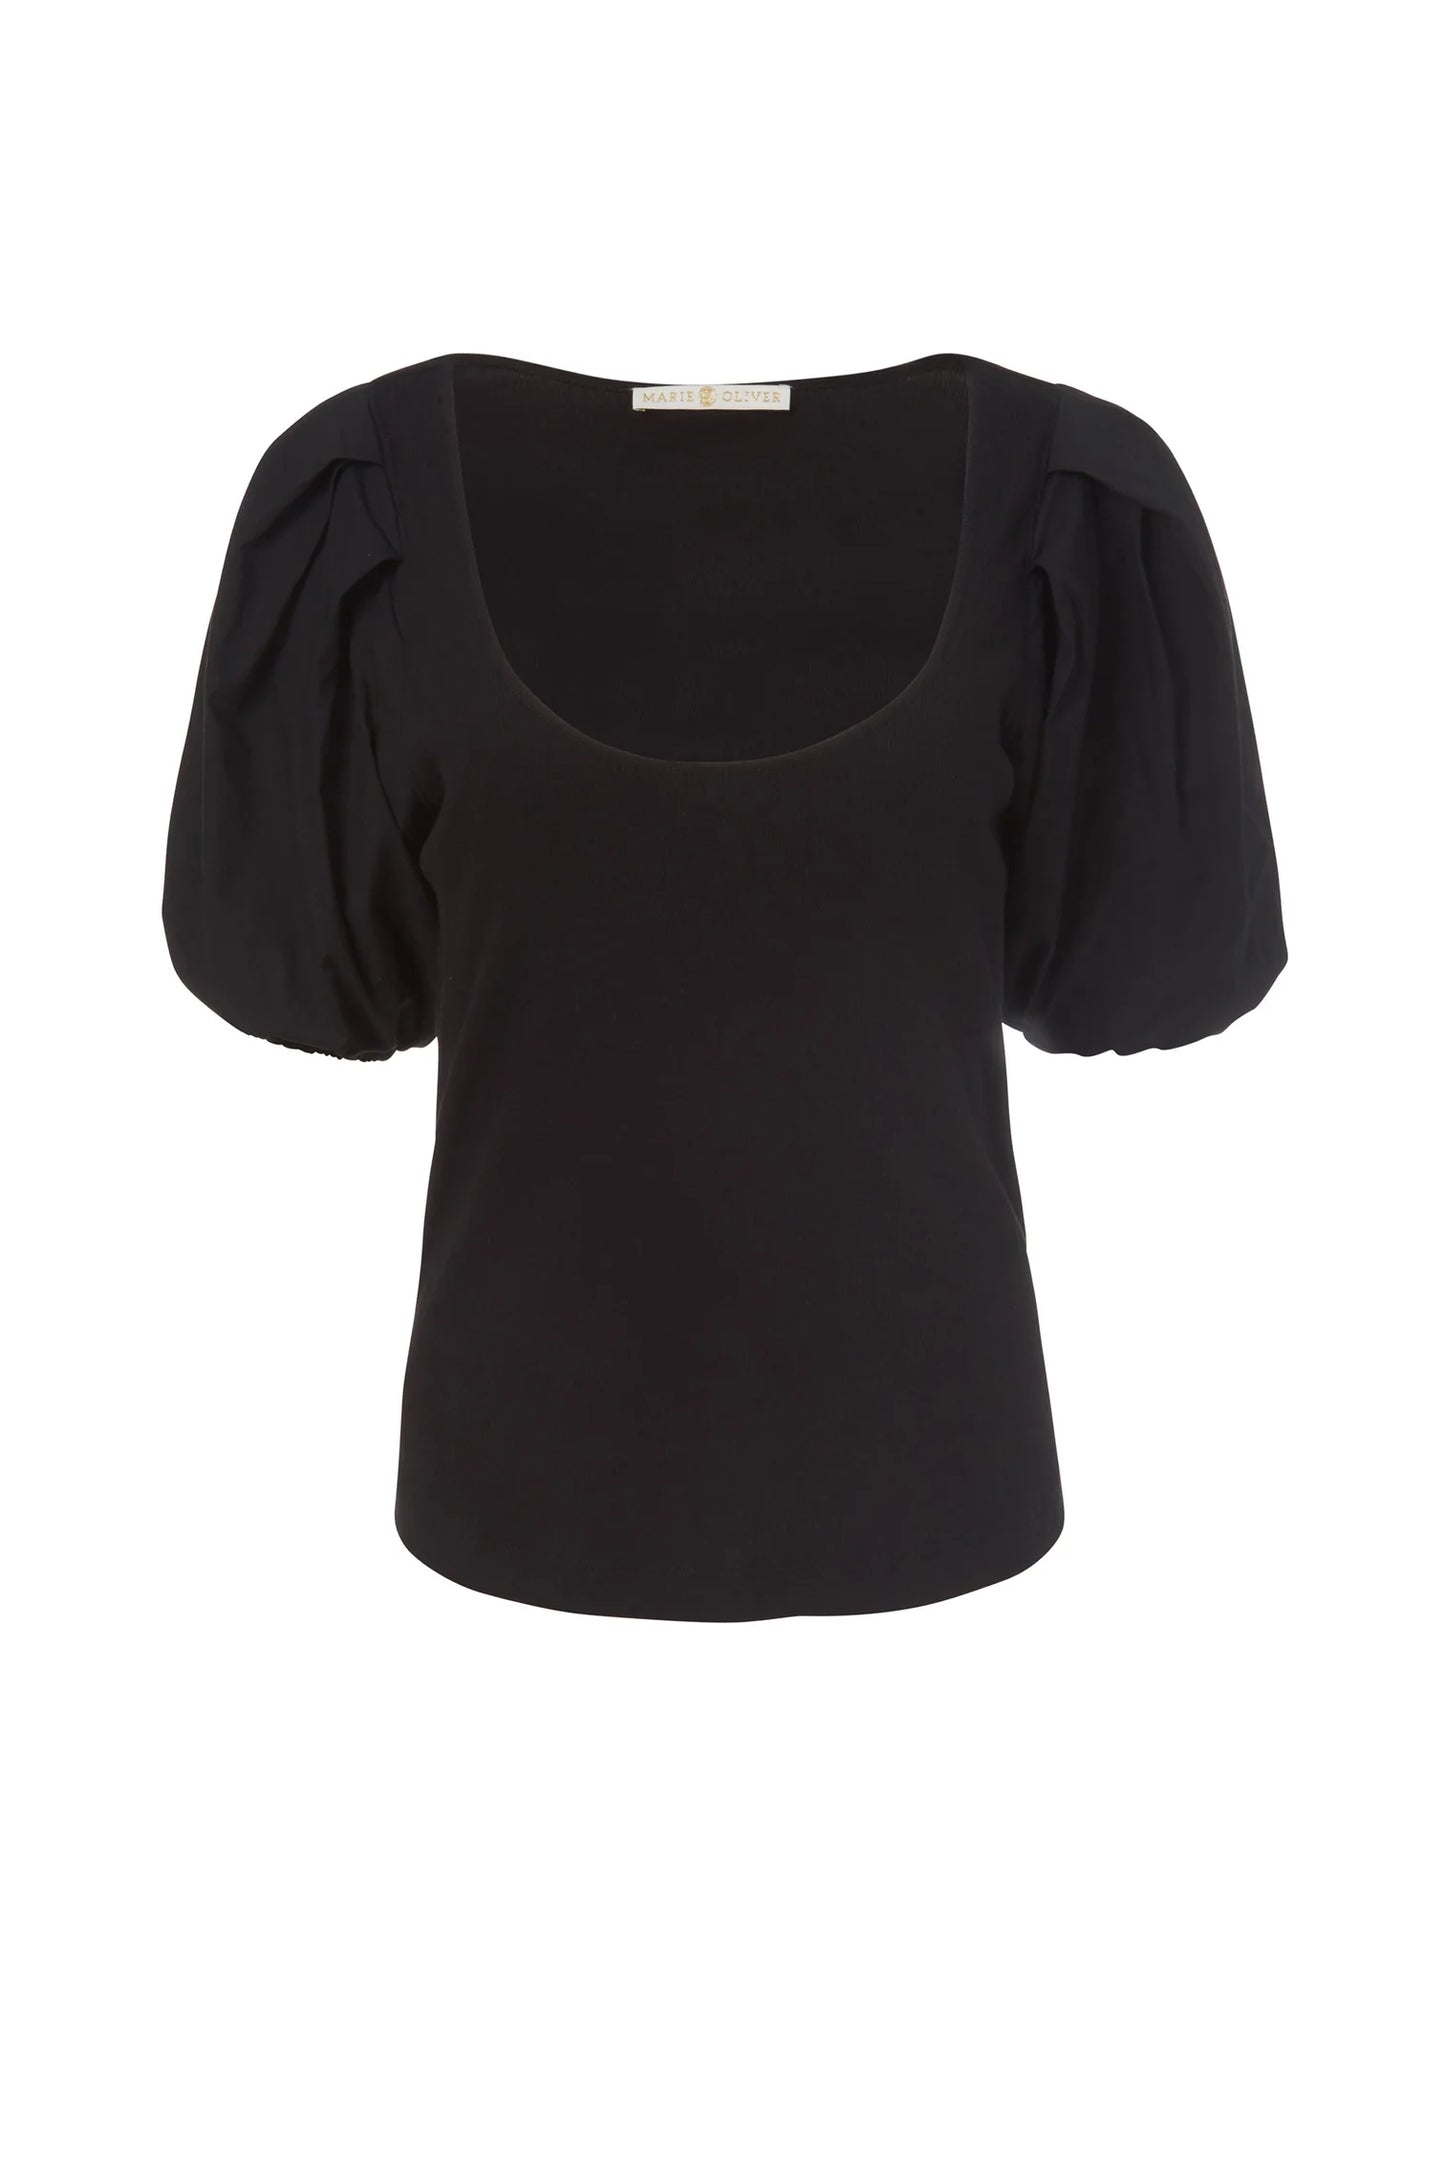 Marie Oliver Leigh Top